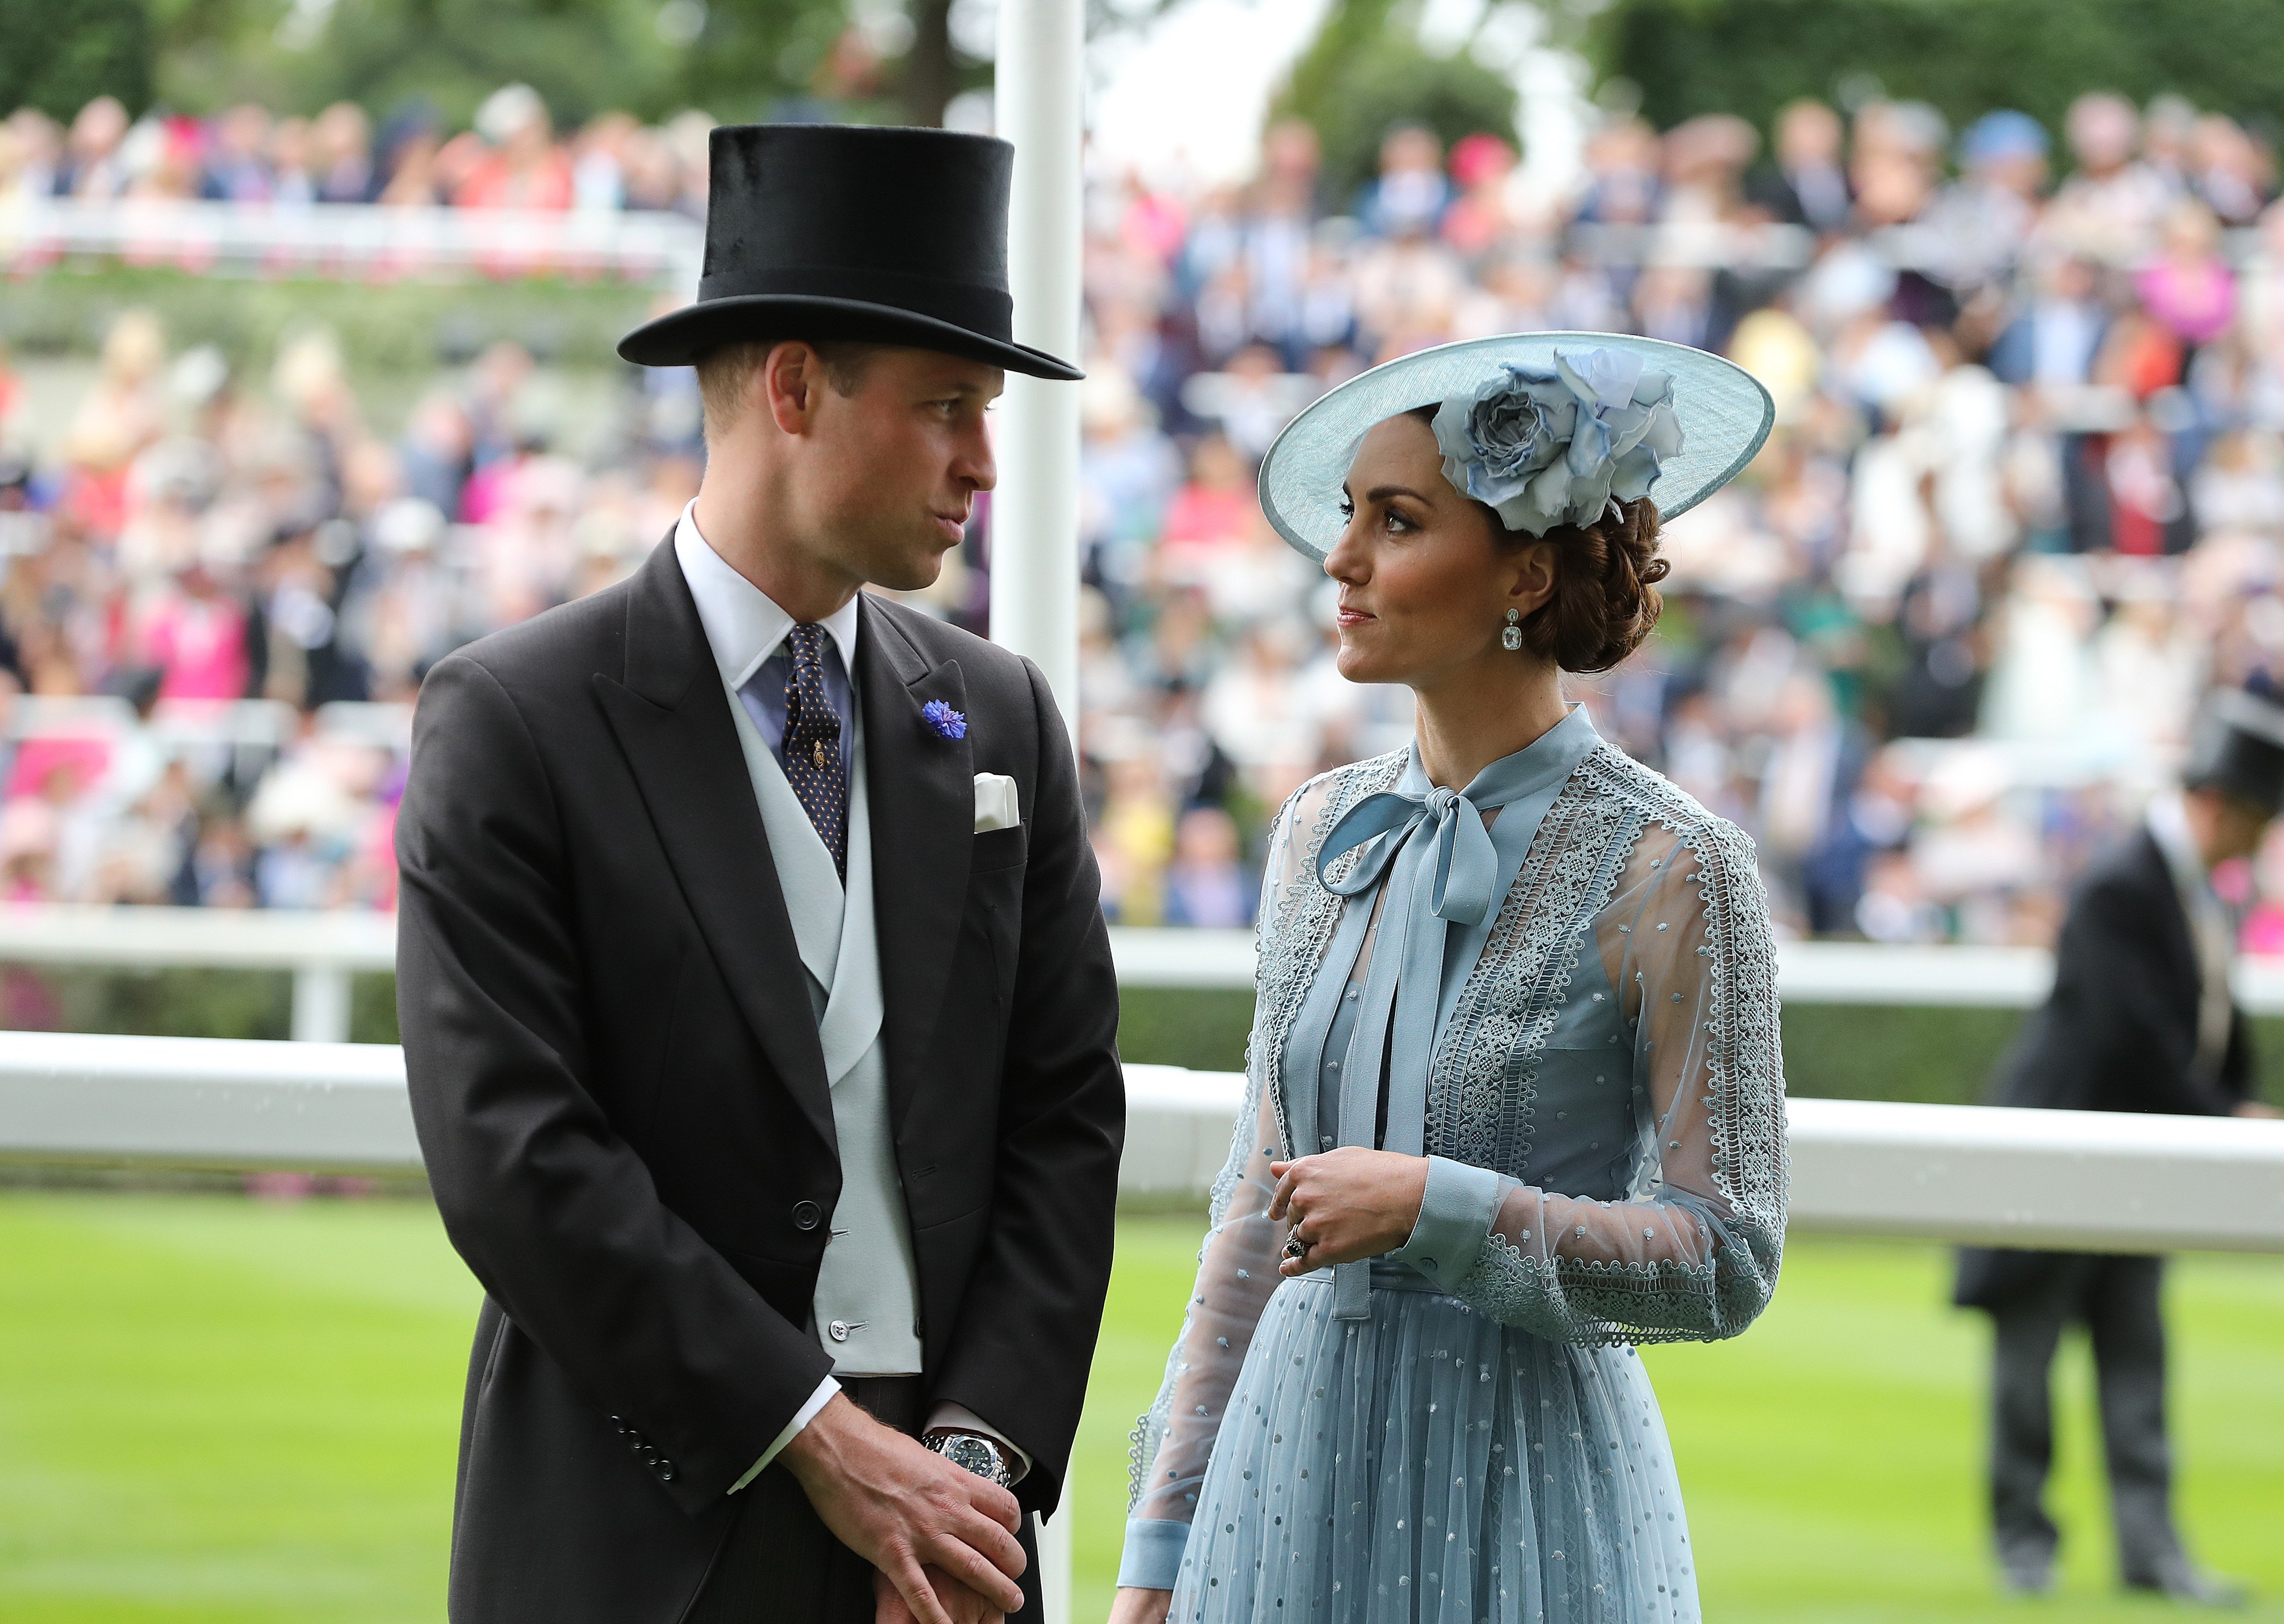 Prince William and Duchess Kate at the Royal Ascot | Photo: Getty Images